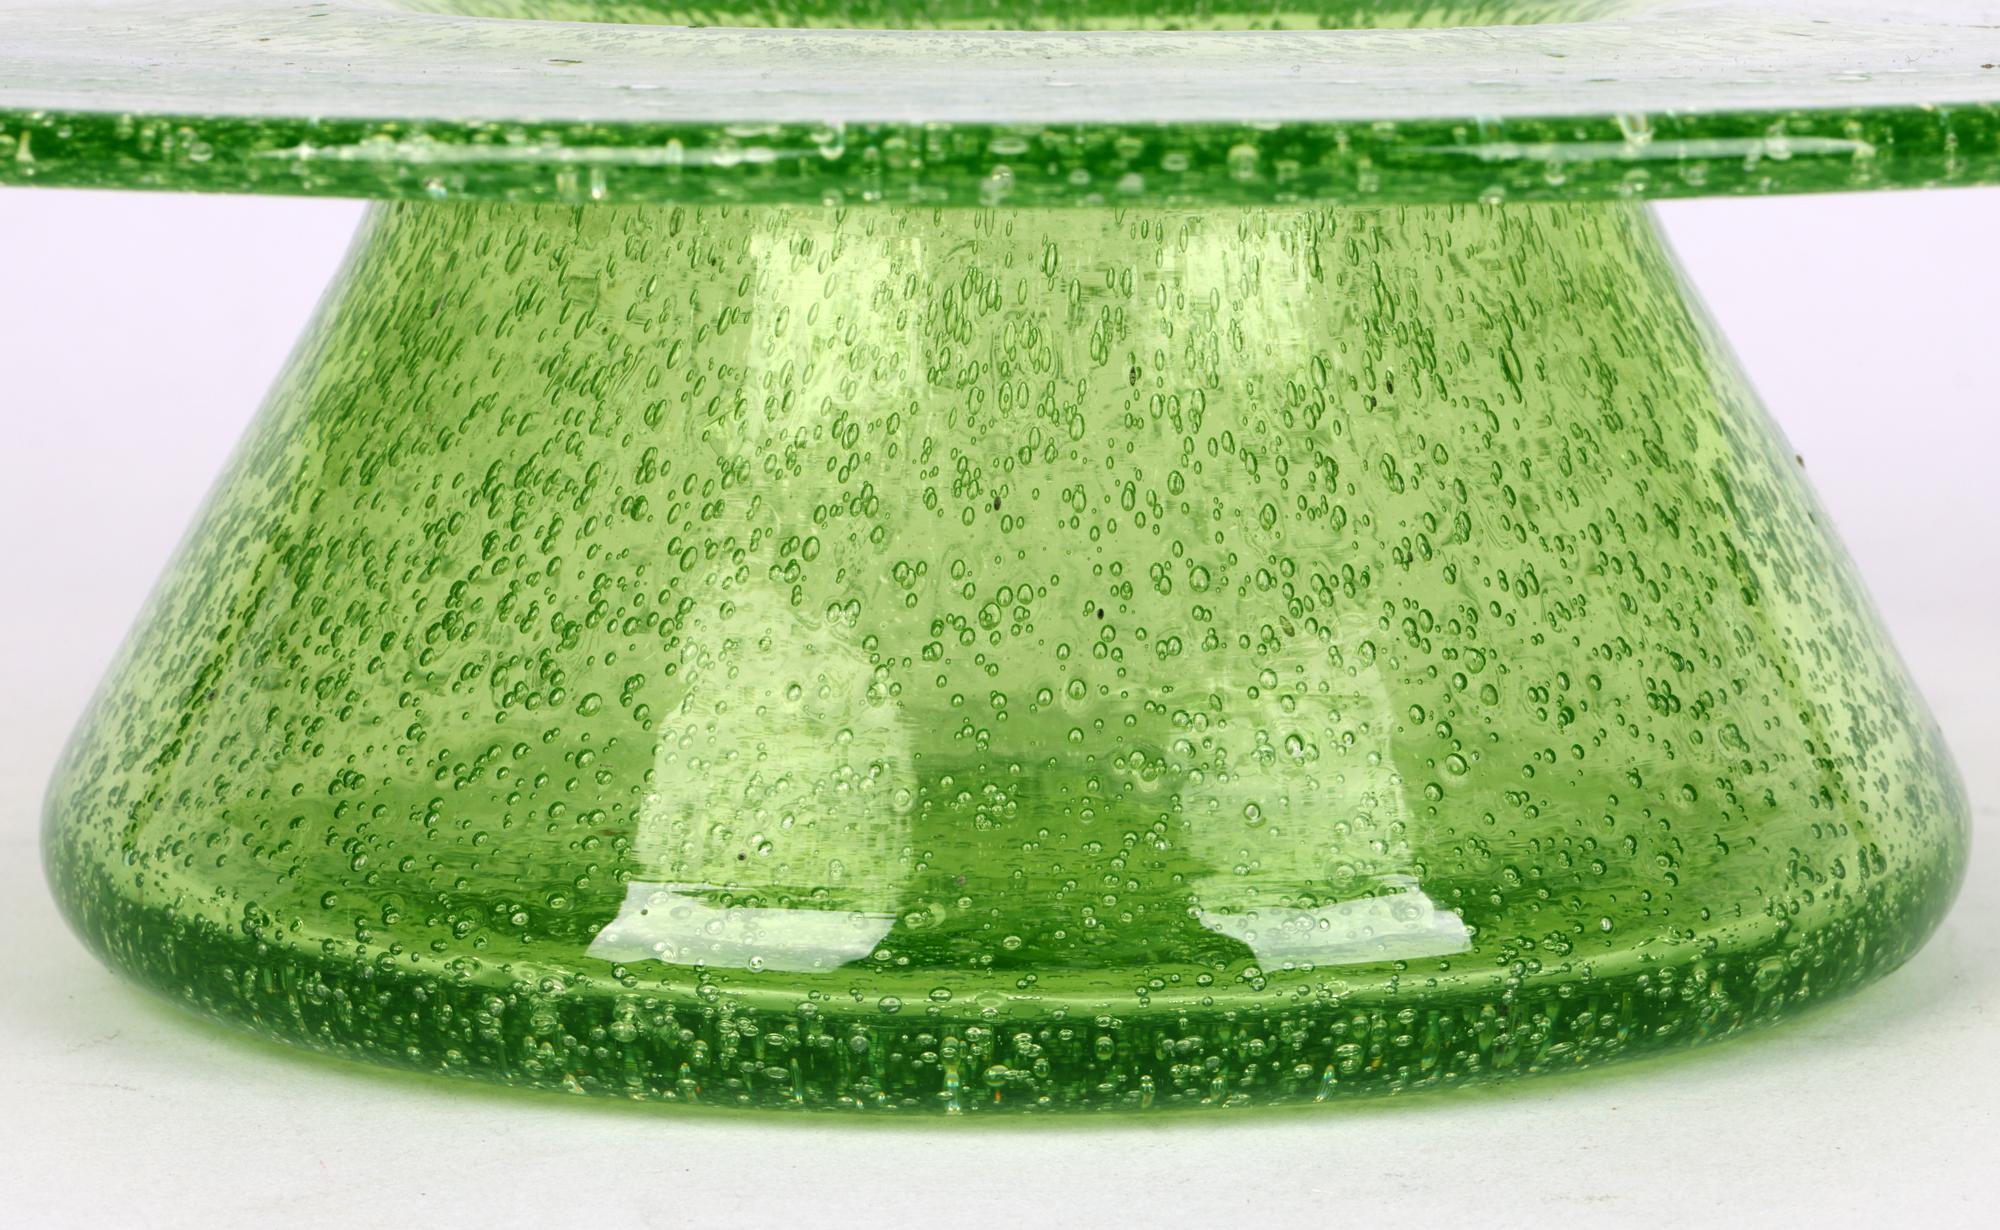 A large Arts & Crafts ‘Clutha’ art glass bowl designed by Christopher Dresser (British, 1834-1904) attributed to Thomas Webb and dated 1879. The bowl is of distinctive wide rounded shape standing on a wide round foot with short conical shaped body